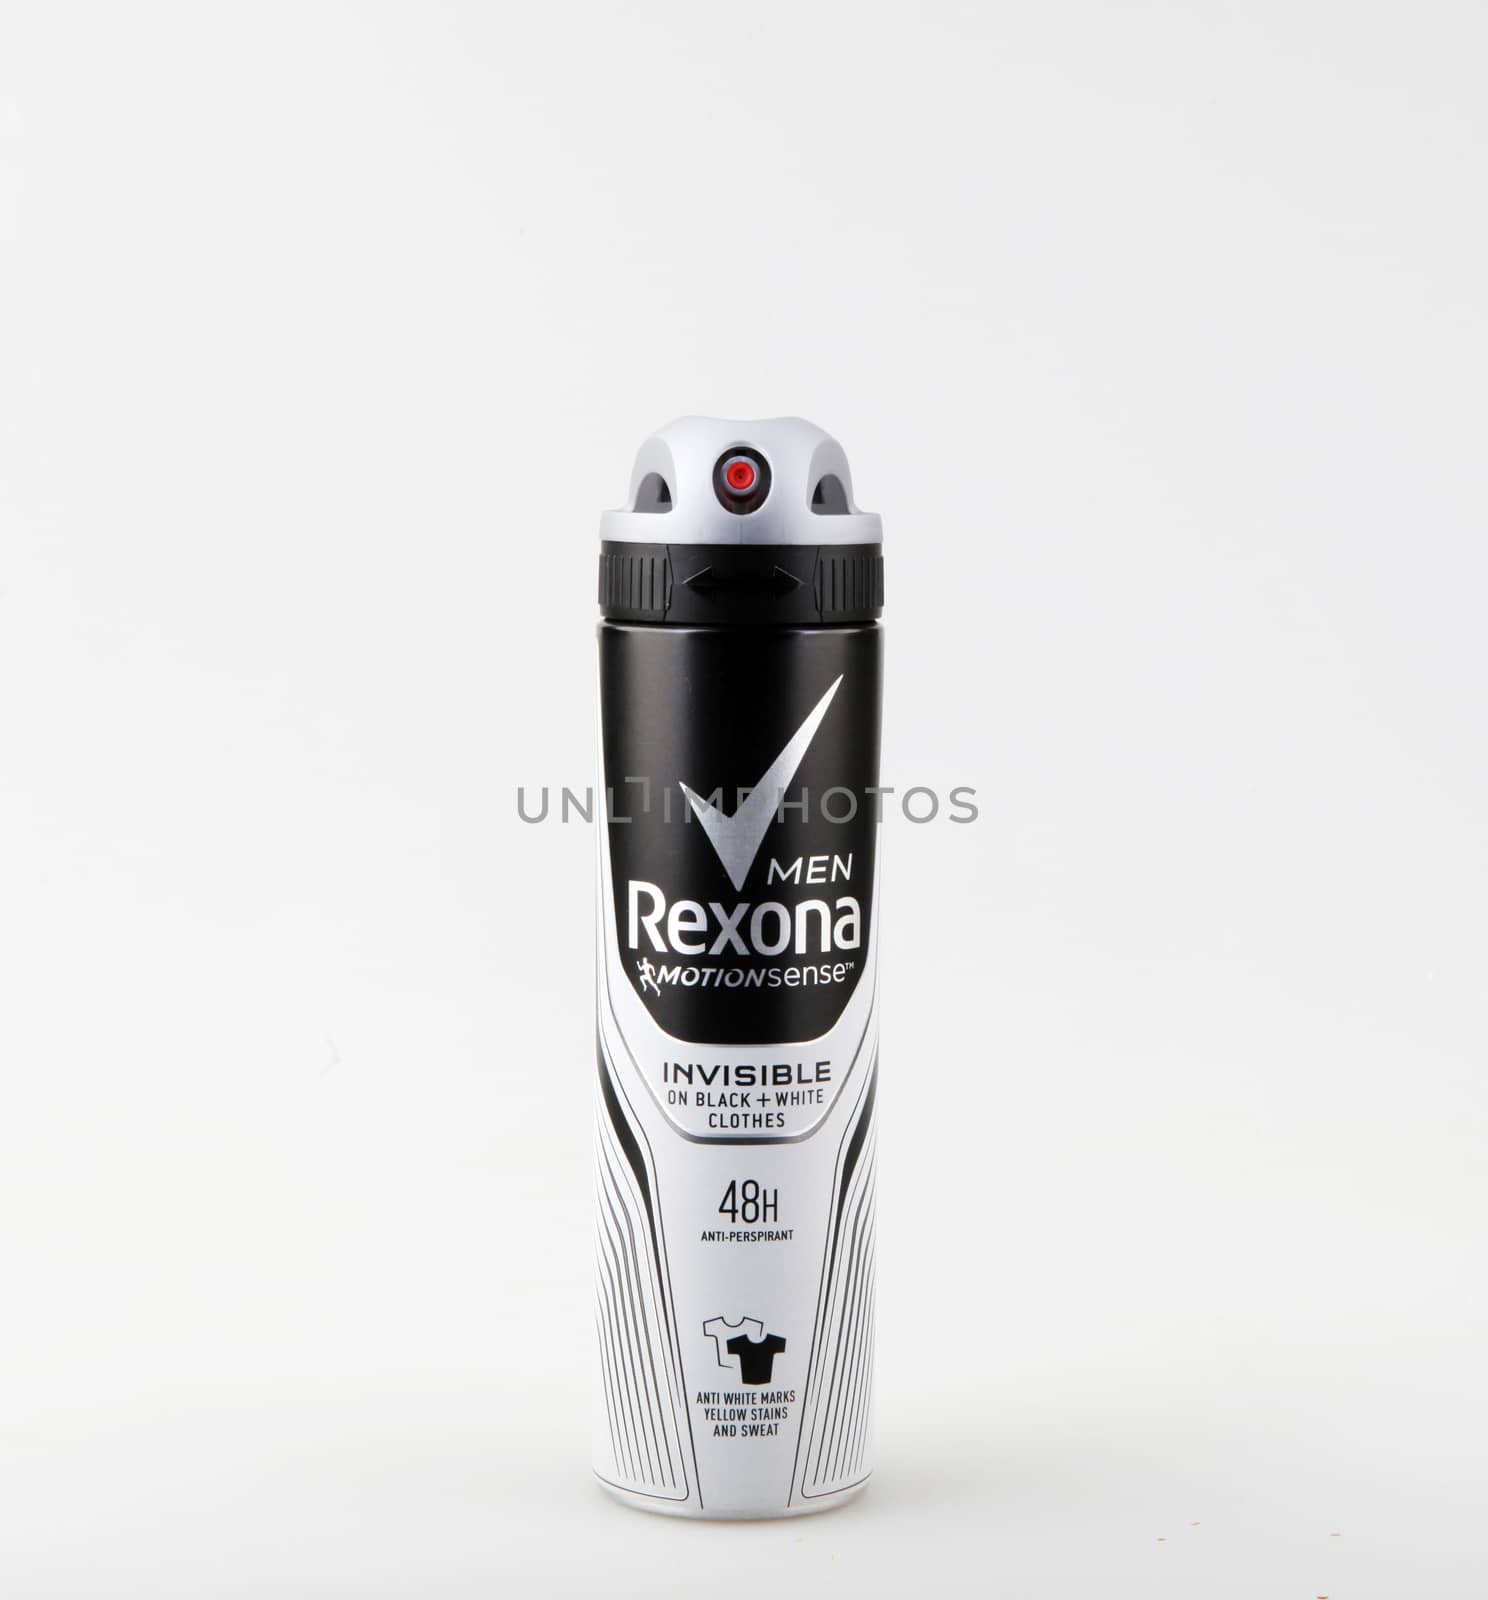 Pomorie, Bulgaria - June 23, 2019: Rexona Is A Deodorant And Antiperspirant Brand Created In Australia And Manufactured By Unilever.